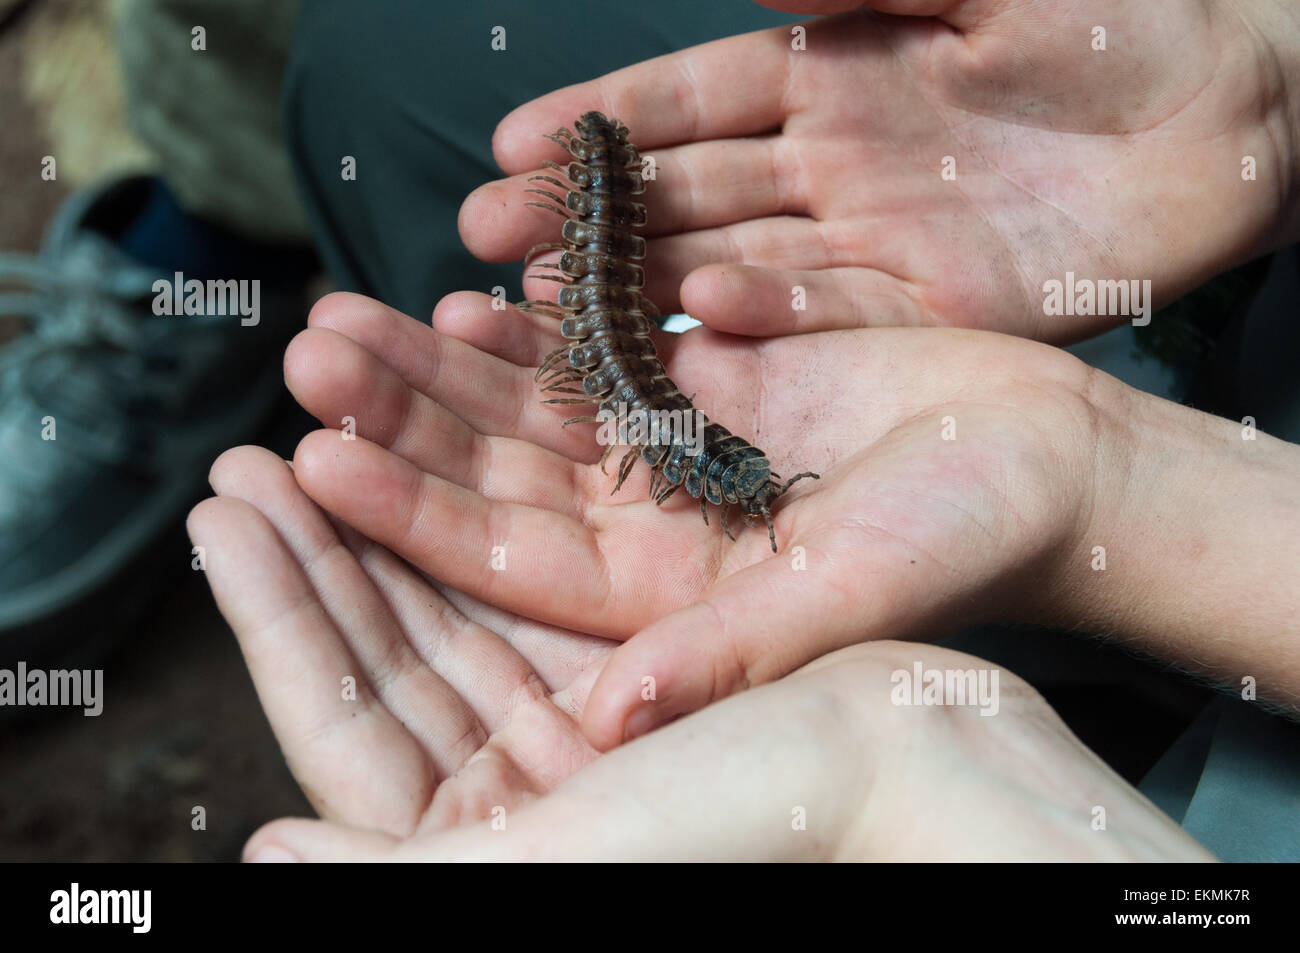 Holding harmless jungle centipede in hands, Danum Valley Conservation, Borneo, Malaysia Stock Photo